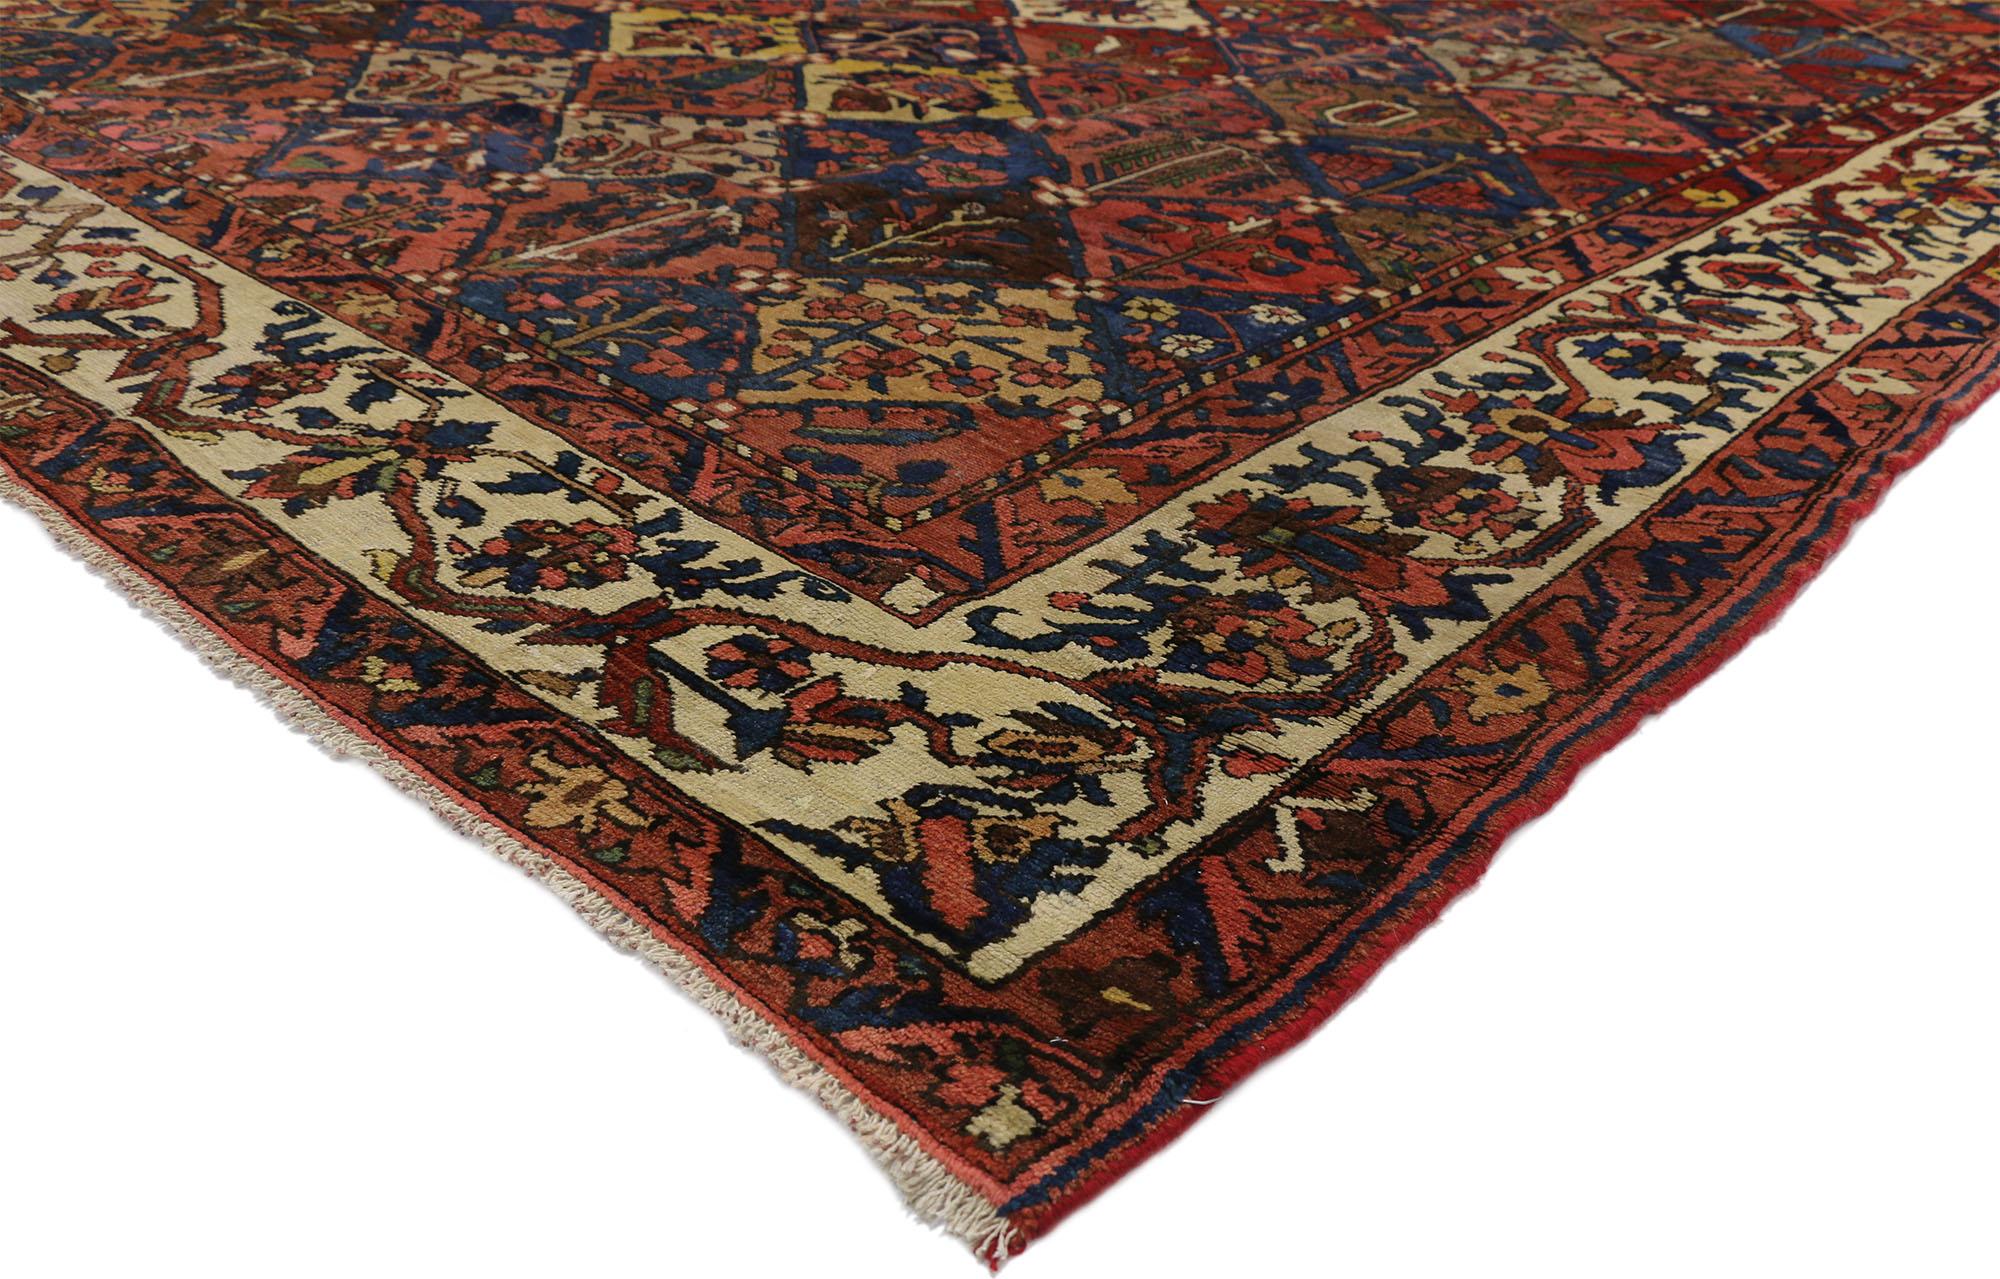 Rich jewel tones integrated with a rich patina, this antique Persian Bakhtiari rug features a garden design and traditional modern style. Classically composed and boasting a truly magnificent panel compartment garden design, this antique Bakhtiari